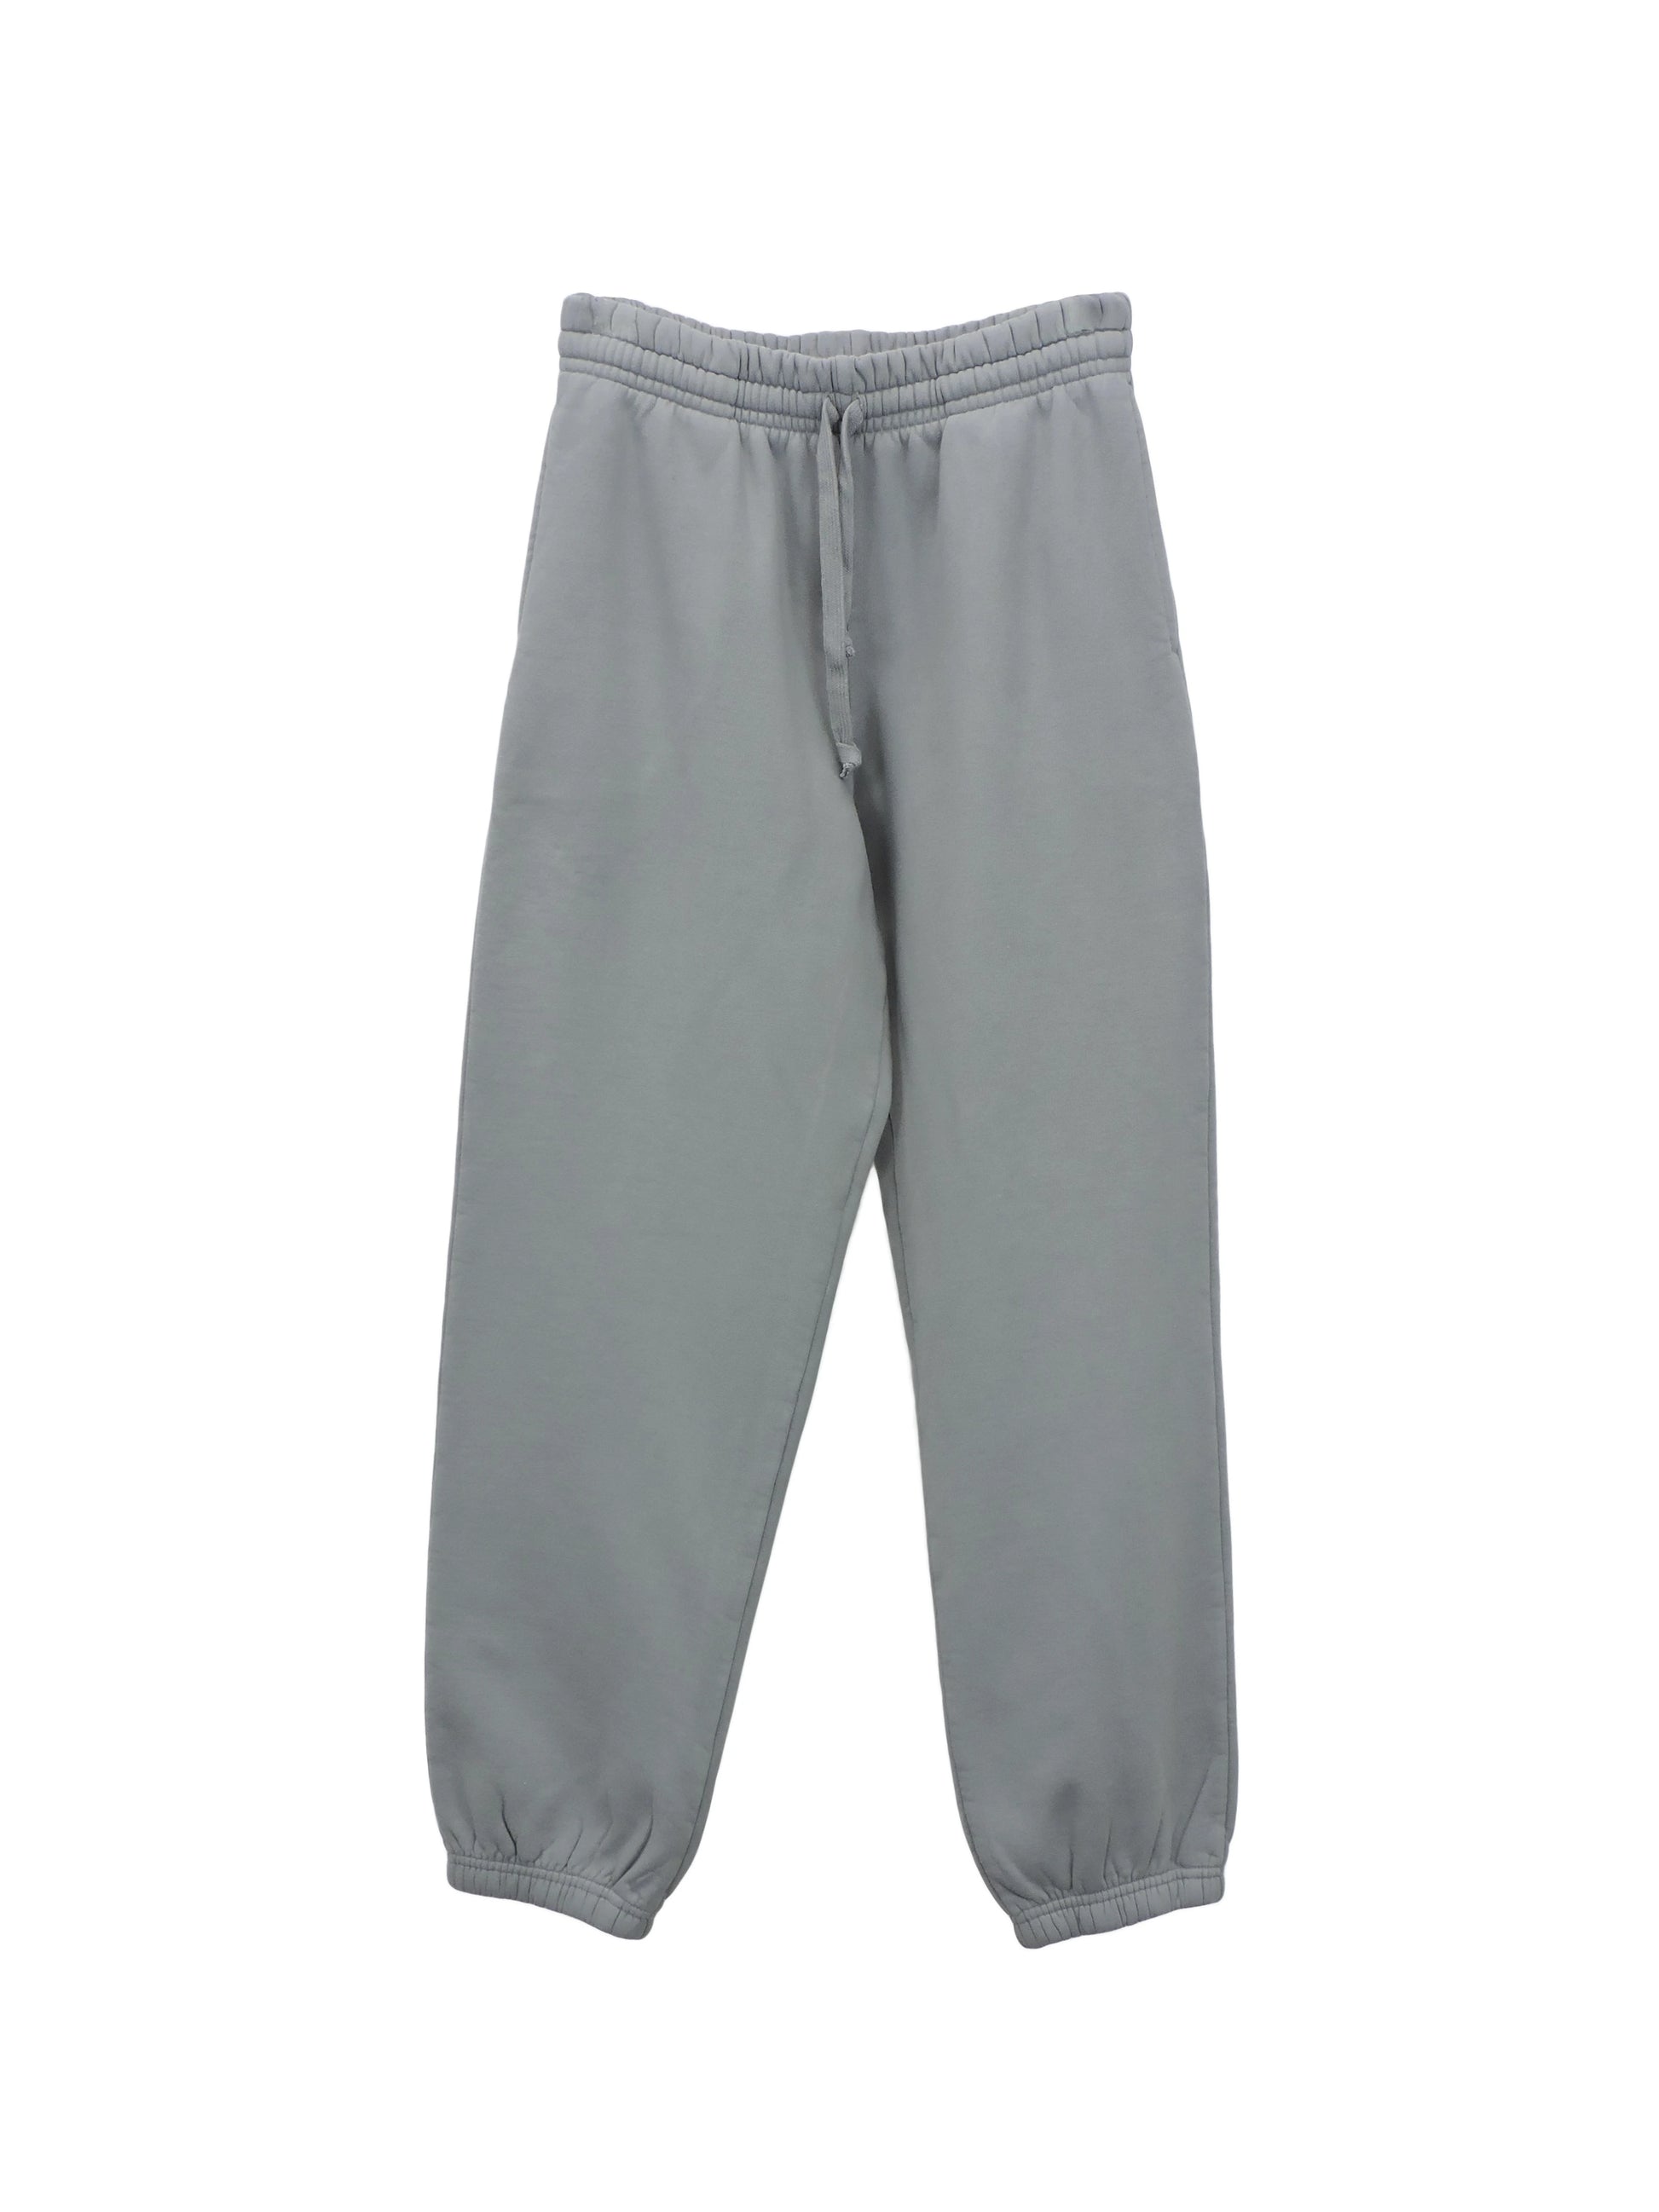 Winter Mens Double Layer Fleece Sweatpants Thick, Warm, And Casual Cotton  Baggy Thermal Grey Wool Trousers From Bakacutie, $16.99